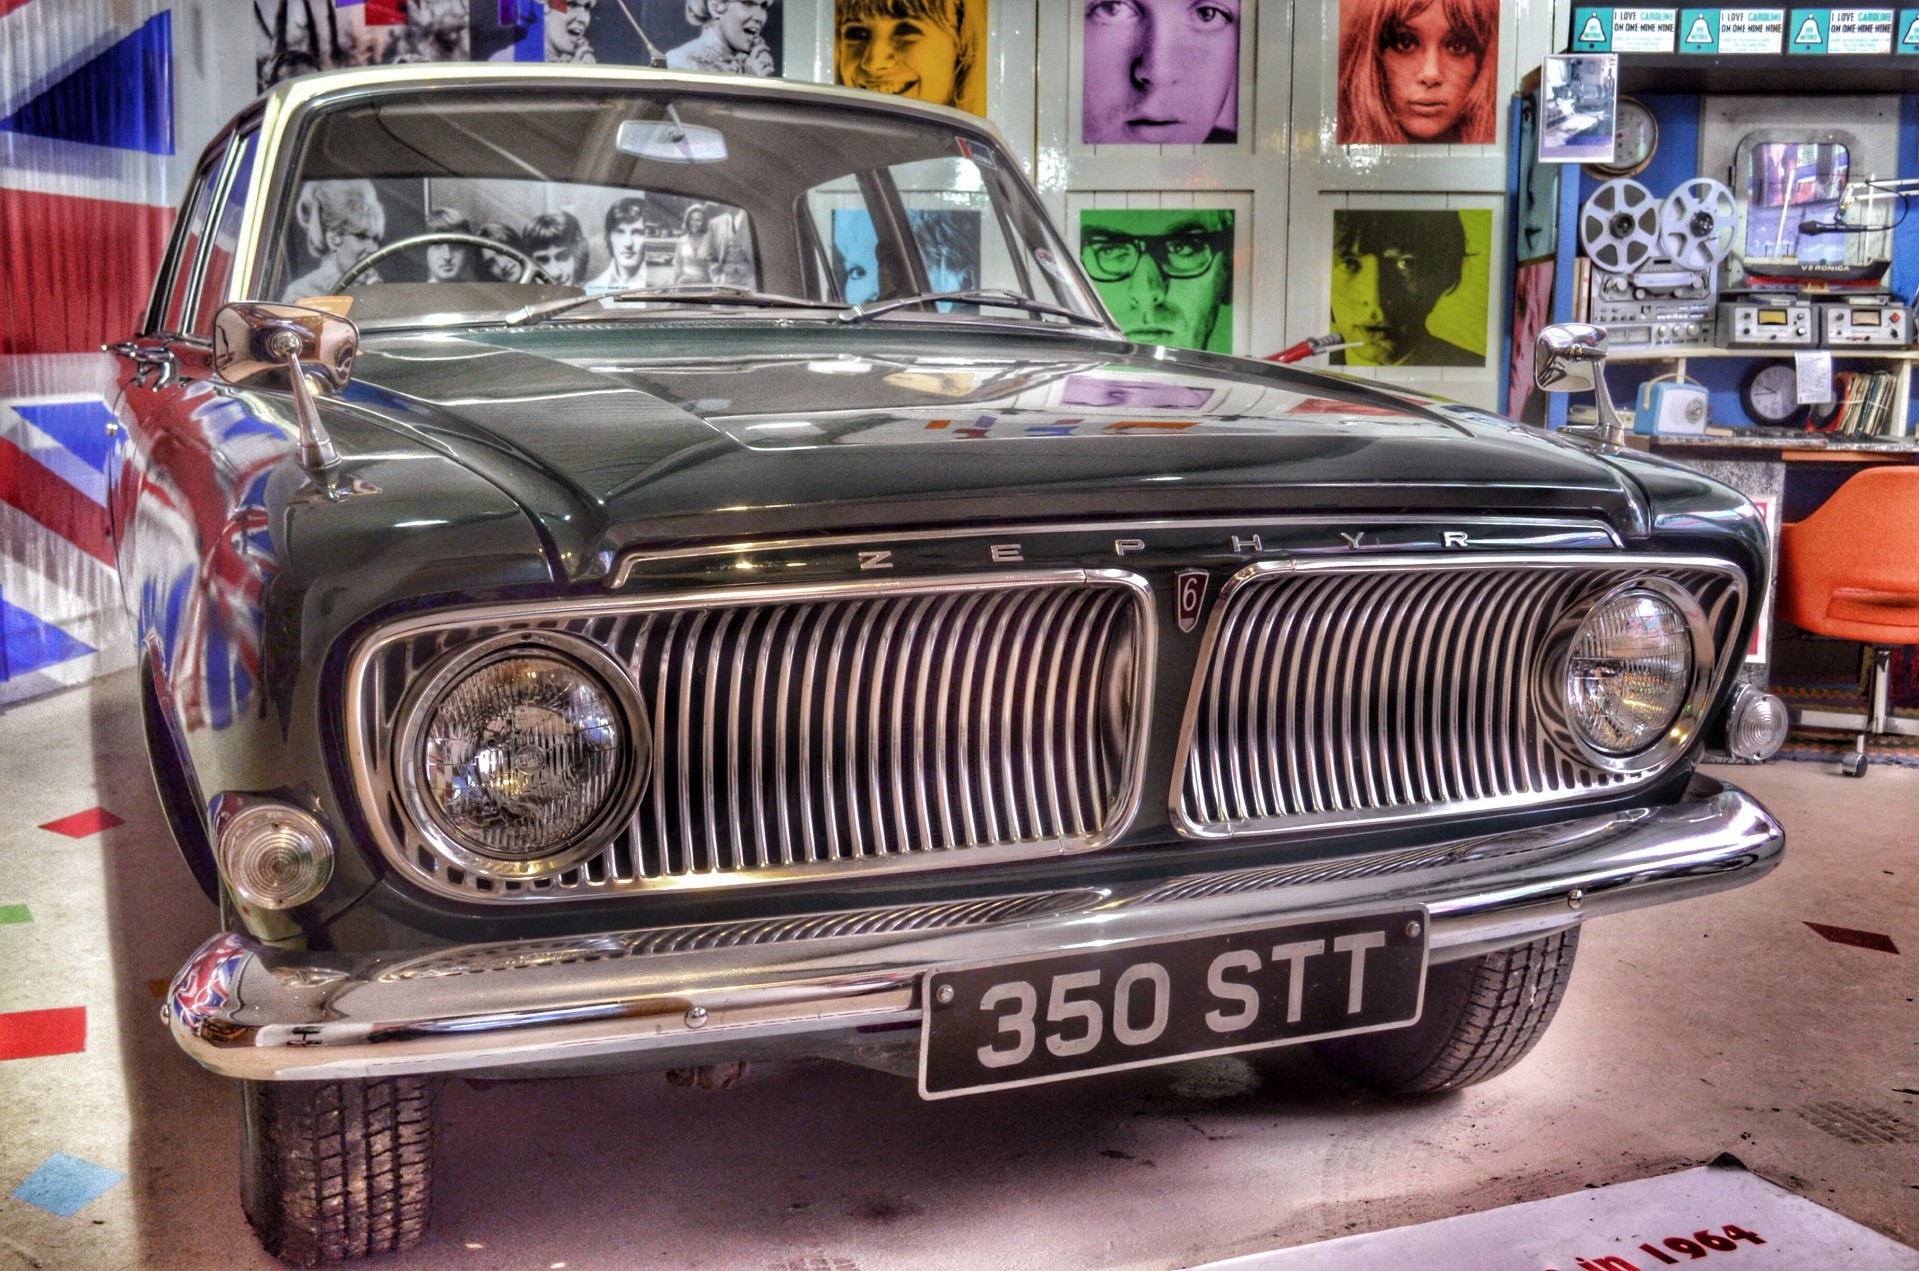 Cotswold Motor Museum.